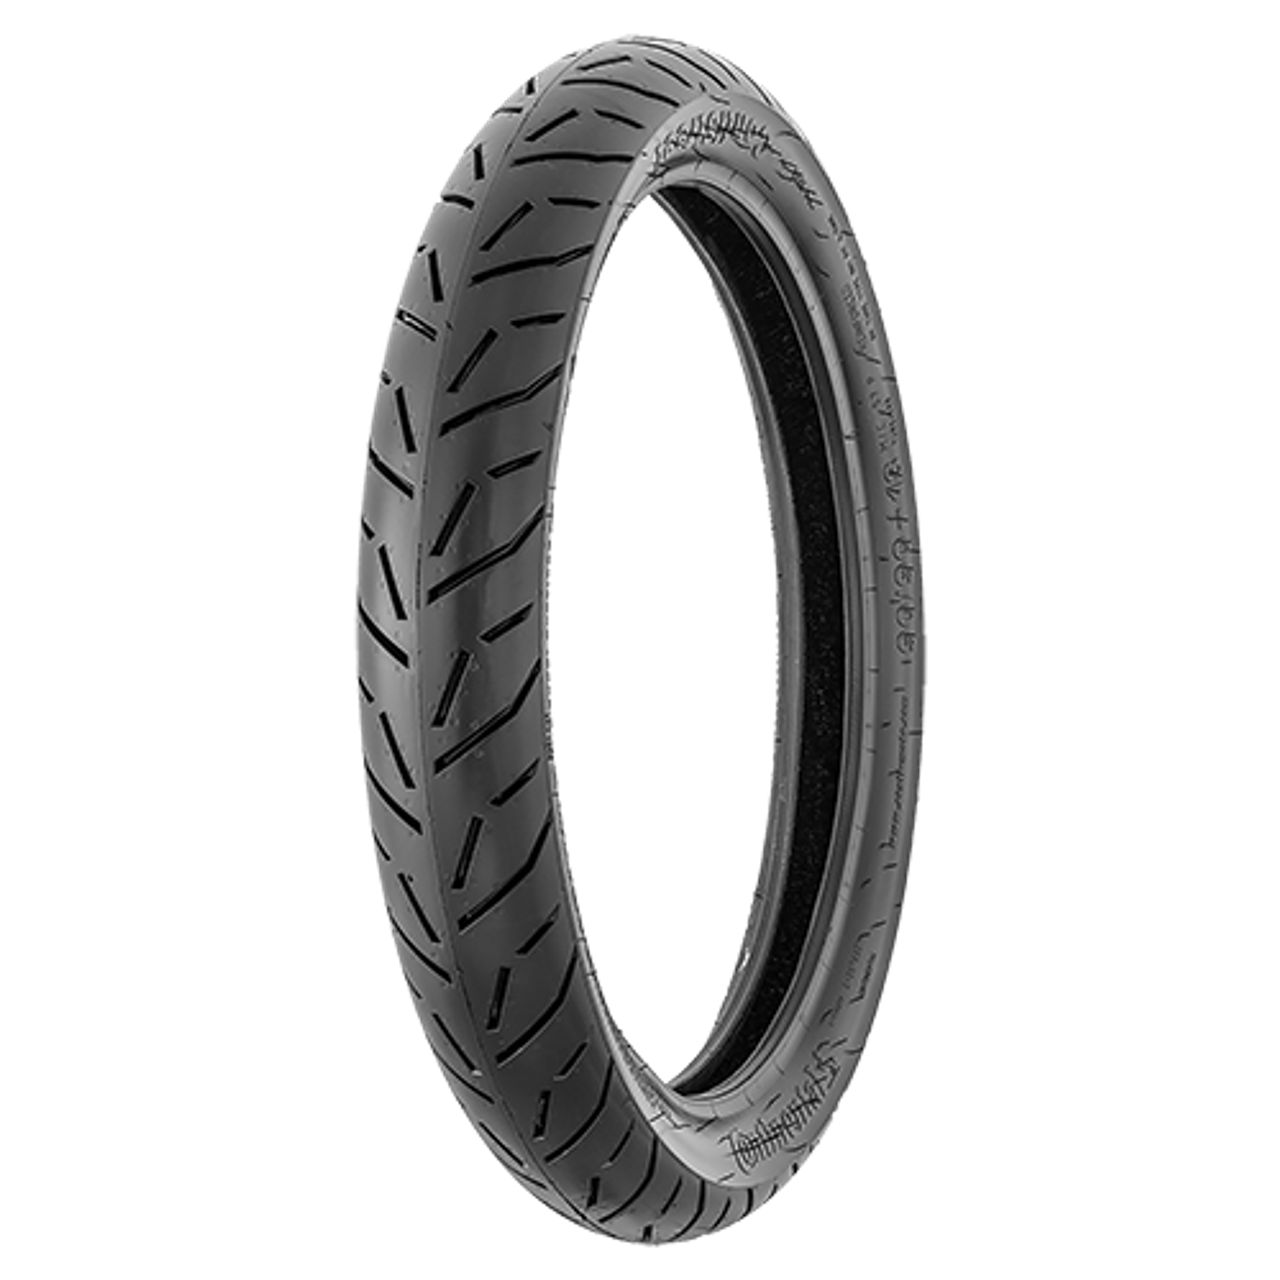 CONTINENTAL CONTISTREET 2.50 - 18 M/C TL 40P BSW FRONT